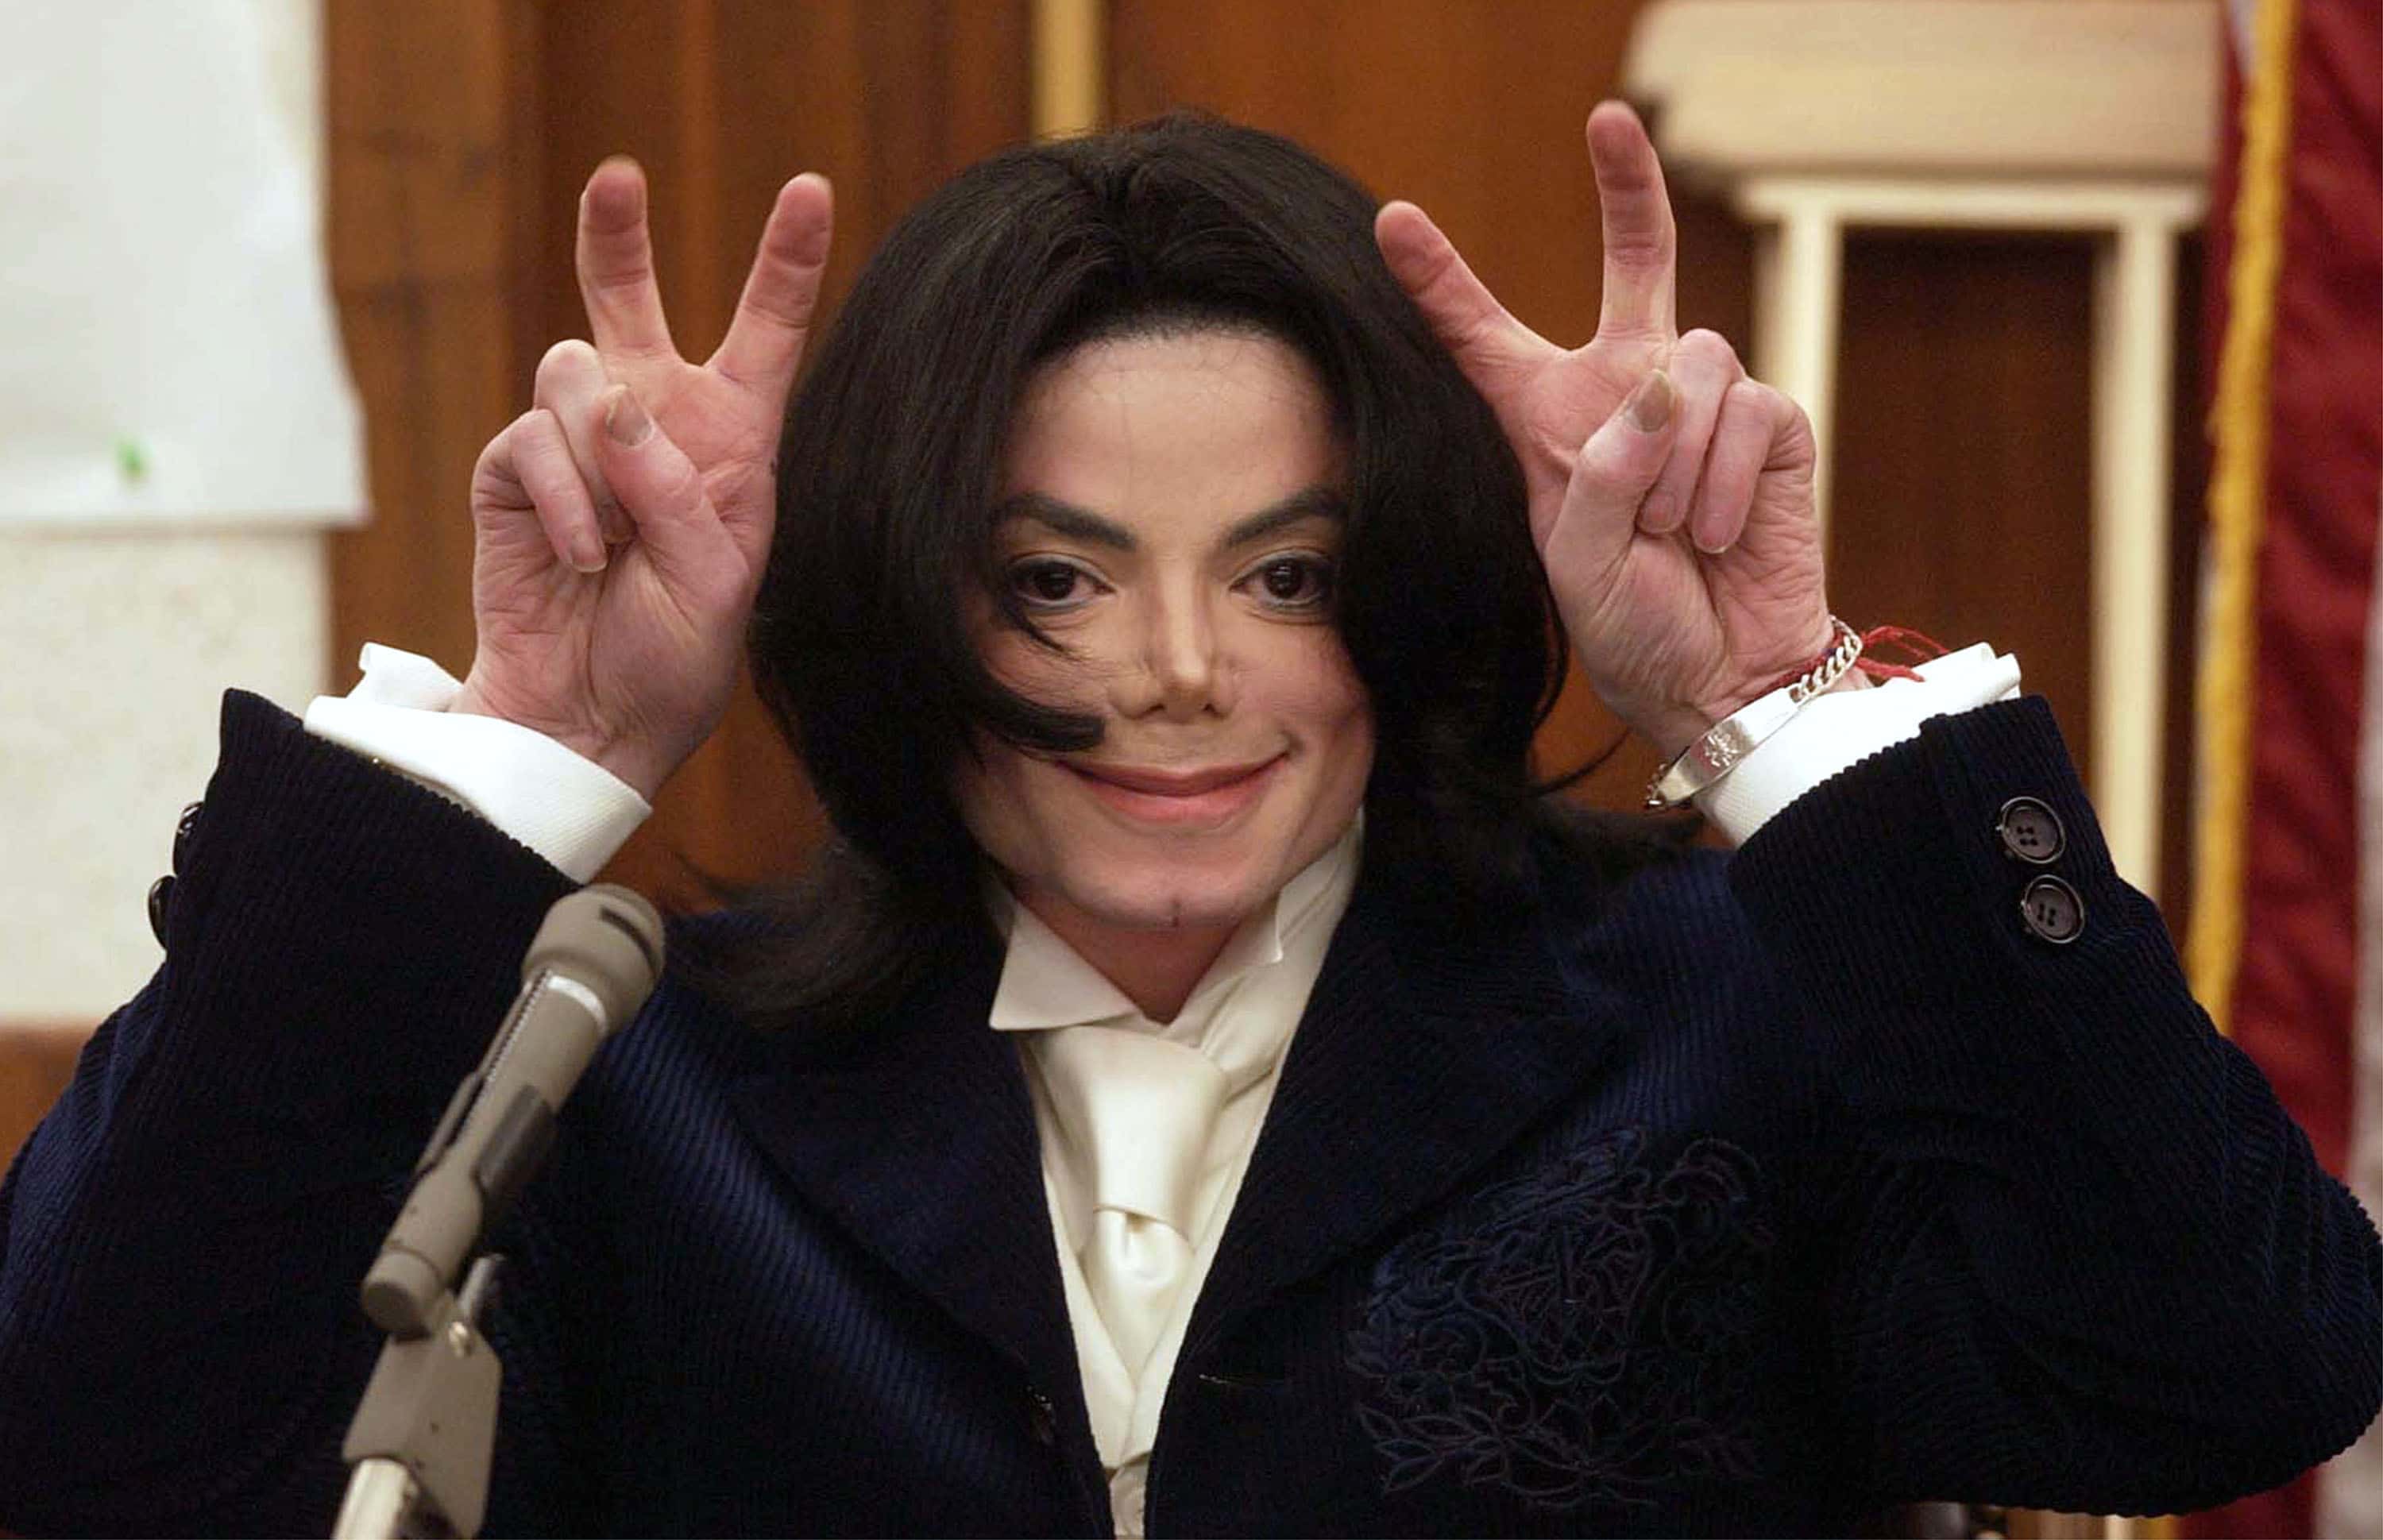 First Look at Michael Jackson Documentary 'Leaving Neverland' [VIDEO